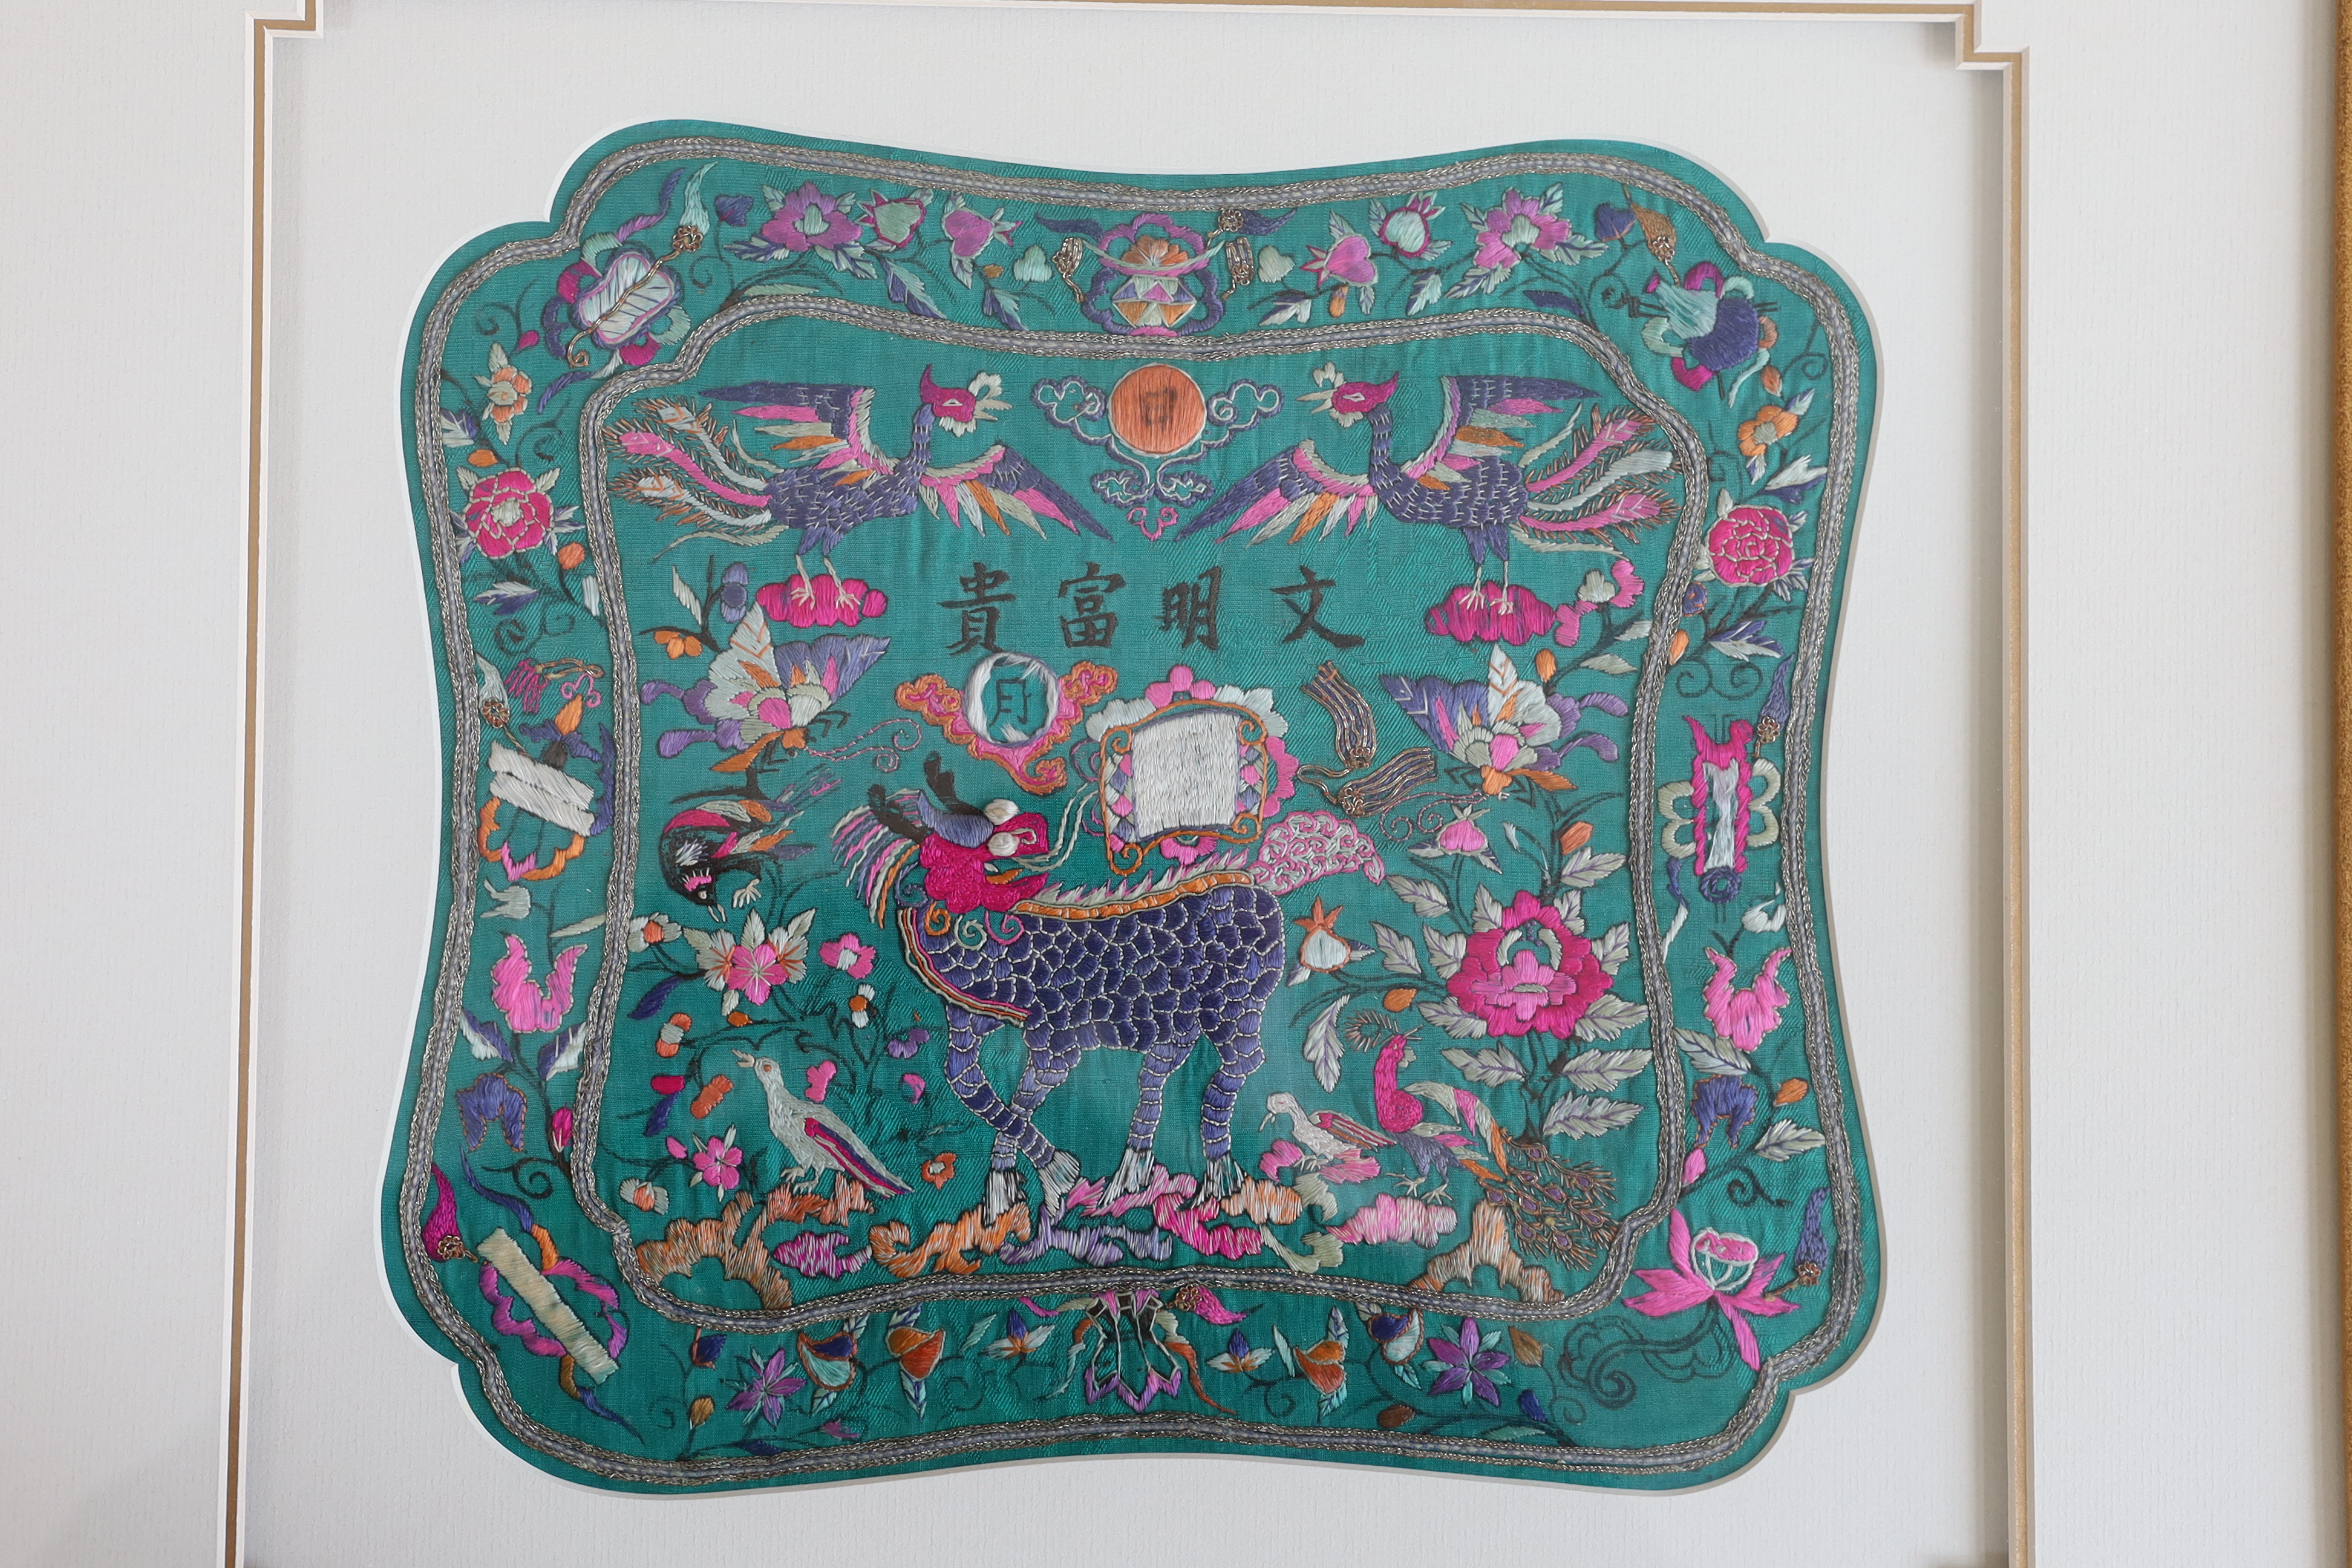 A late 19th early/20th century Chinese incised embroidery, decorated with symbolic animal, bird and flower motifs and border decoration, ornately mounted and framed, 29cm wide, 26cm high, A